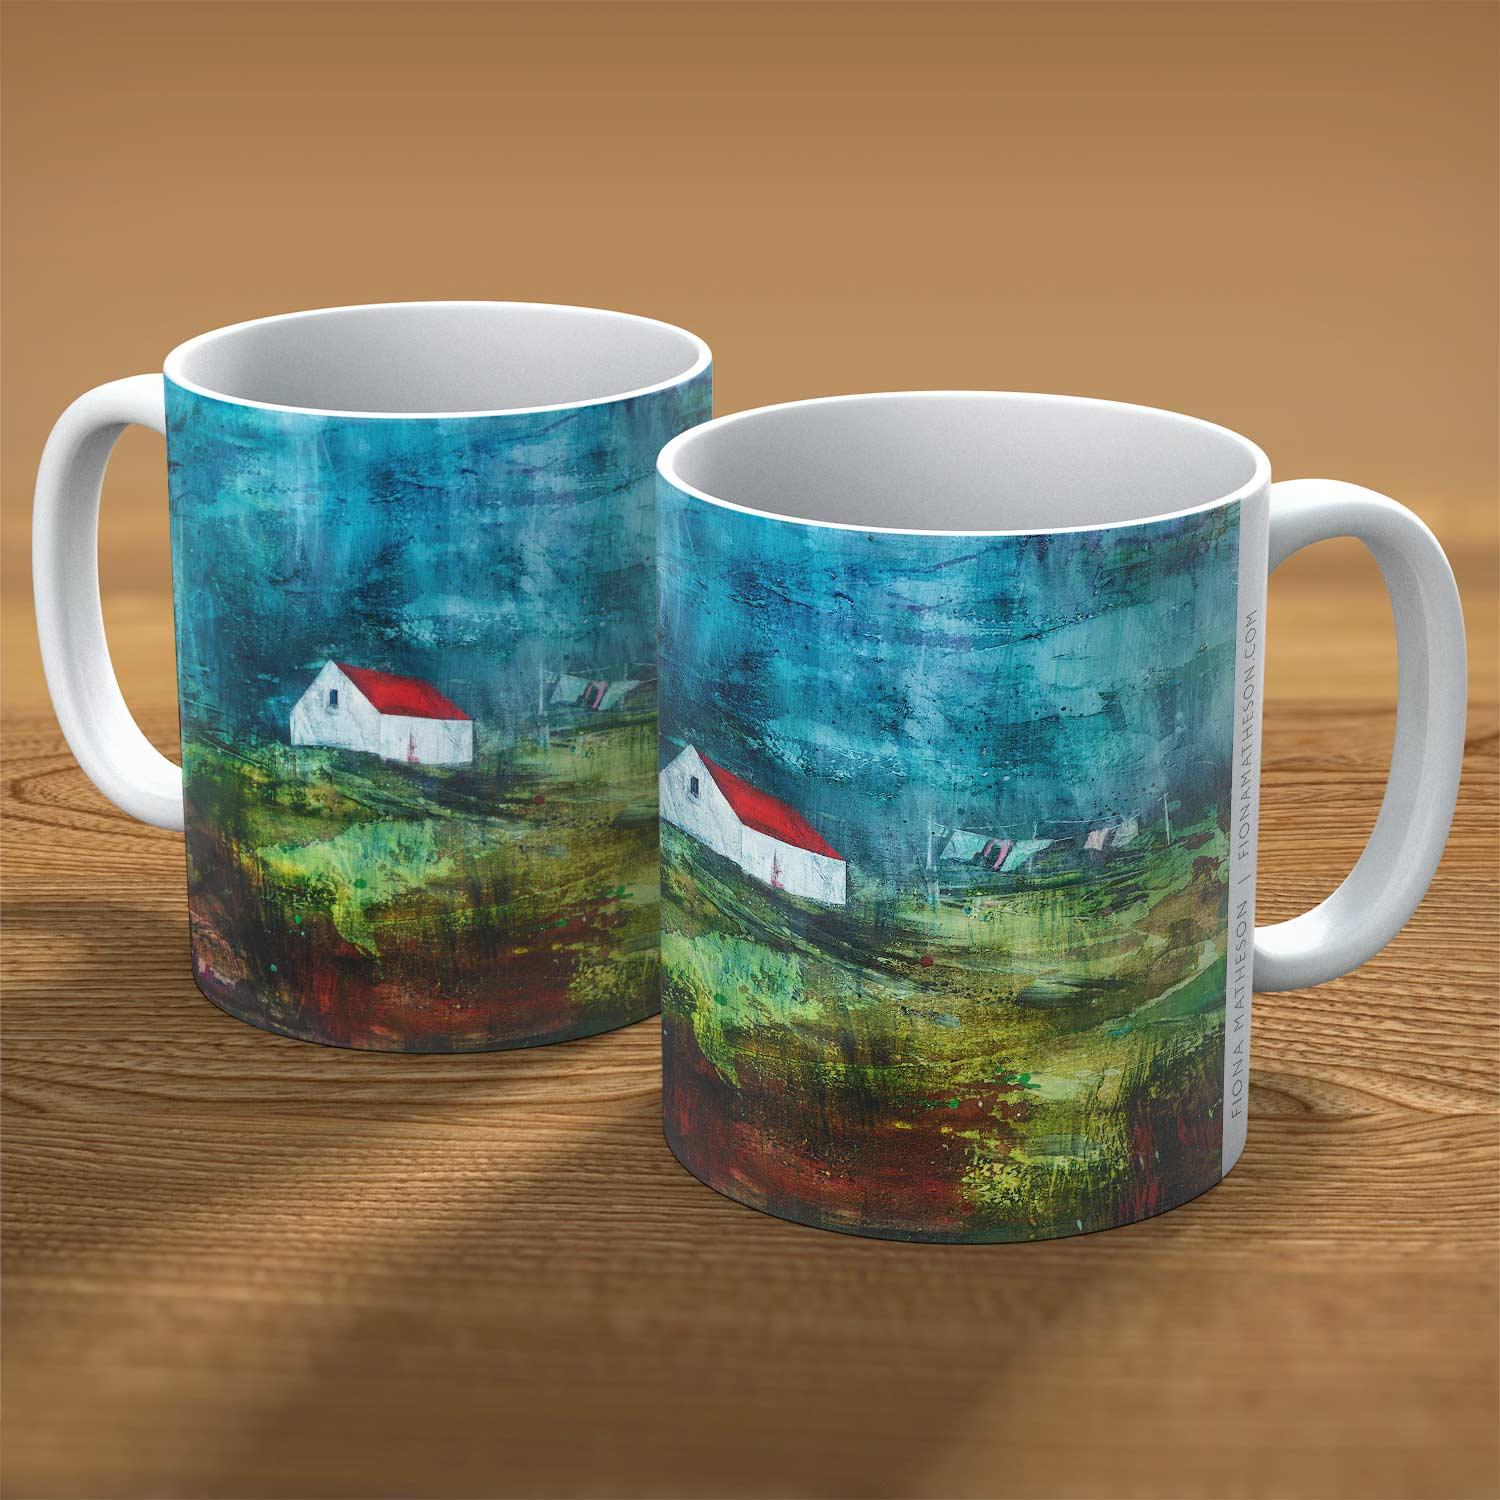 Drying Green and Peat Bog Mug from an original painting by artist Fiona Matheson